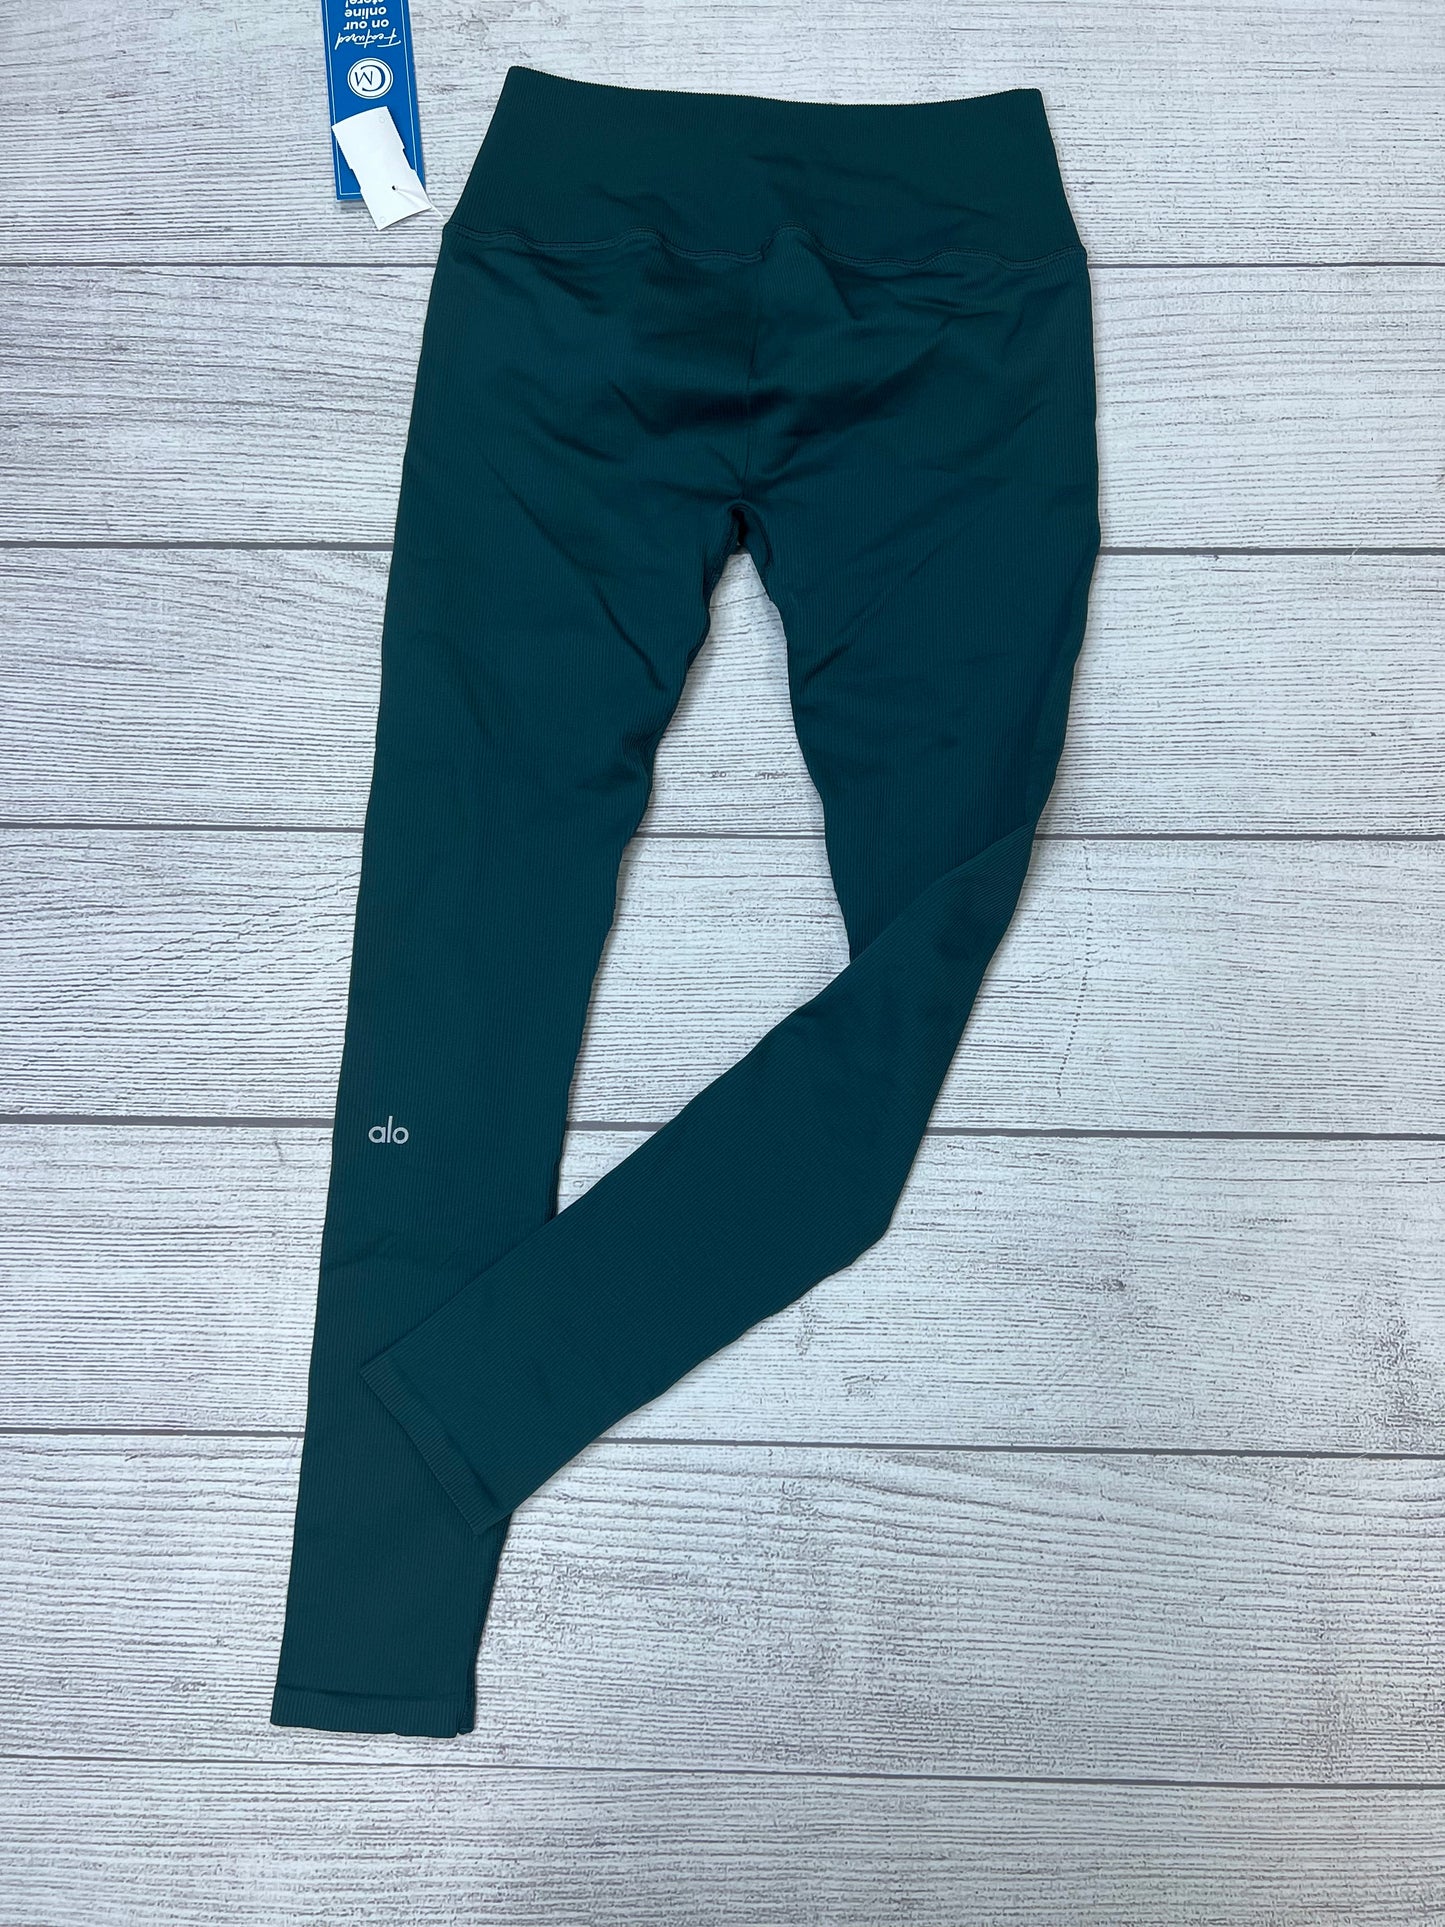 Teal Athletic Leggings Alo, Size M